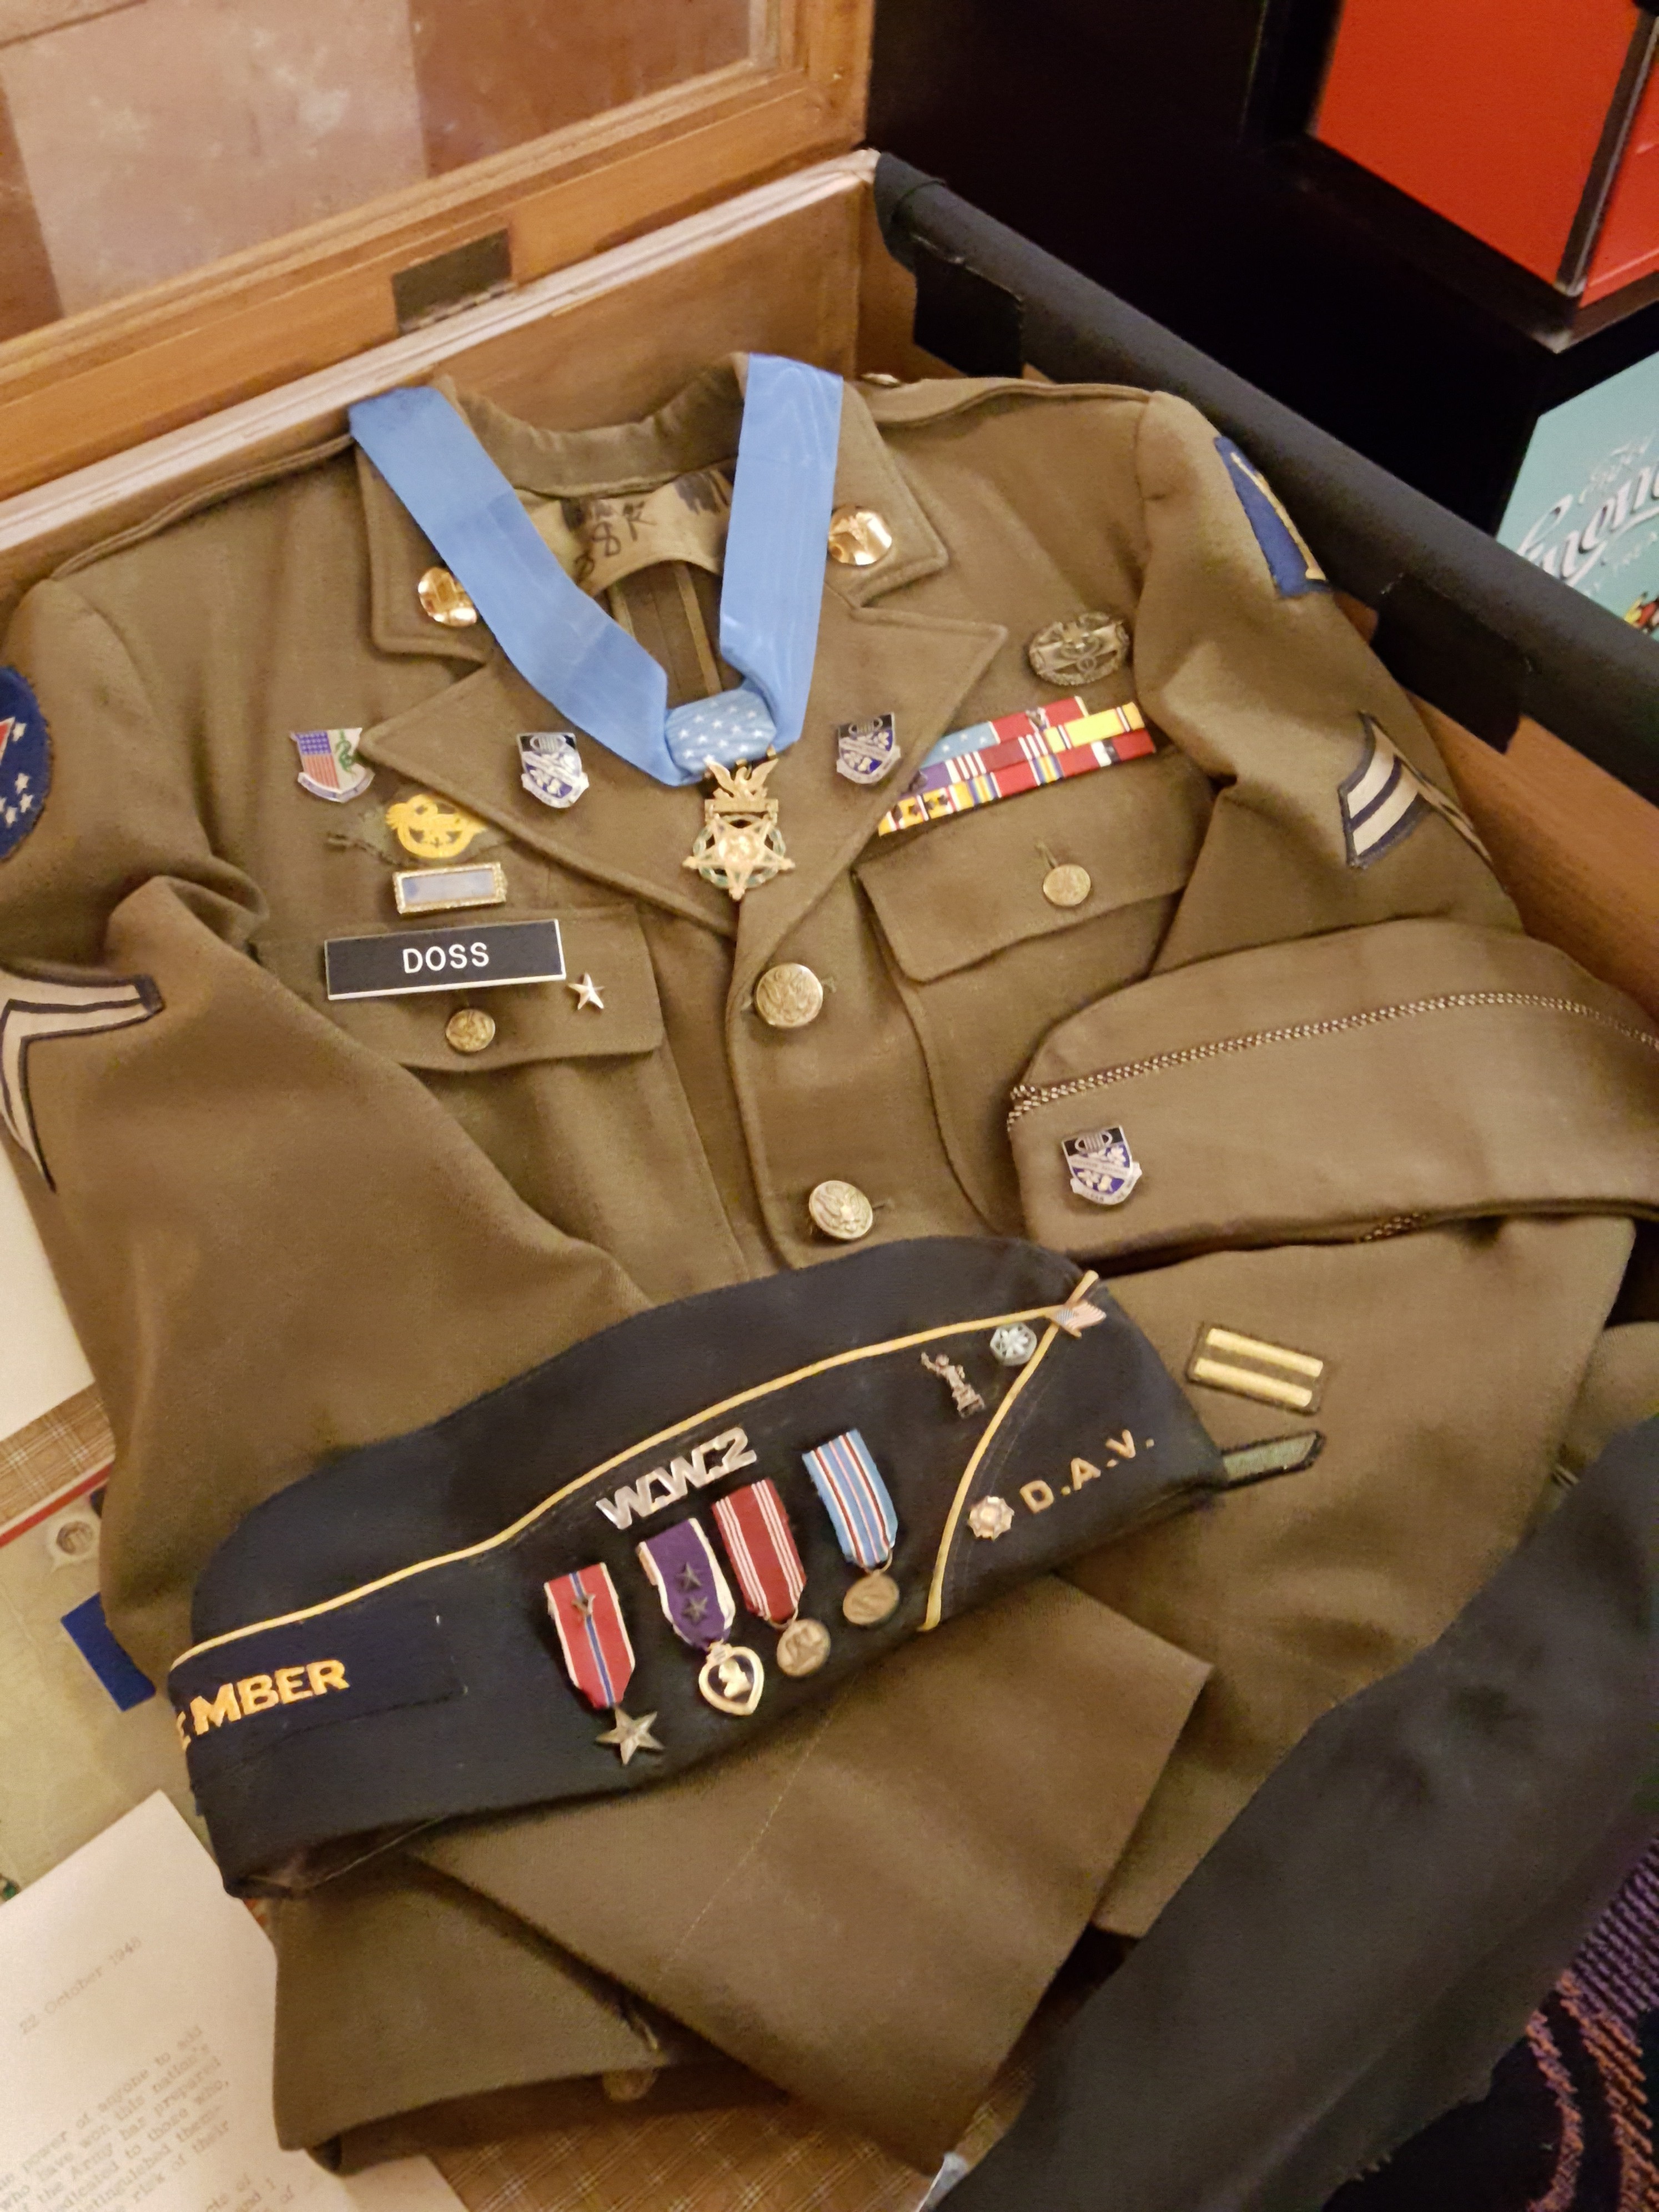 Doss's Army Service Uniform with his replacement Medal of Honor. These items were received in 2007 and will be on display in our department exhibit cases.